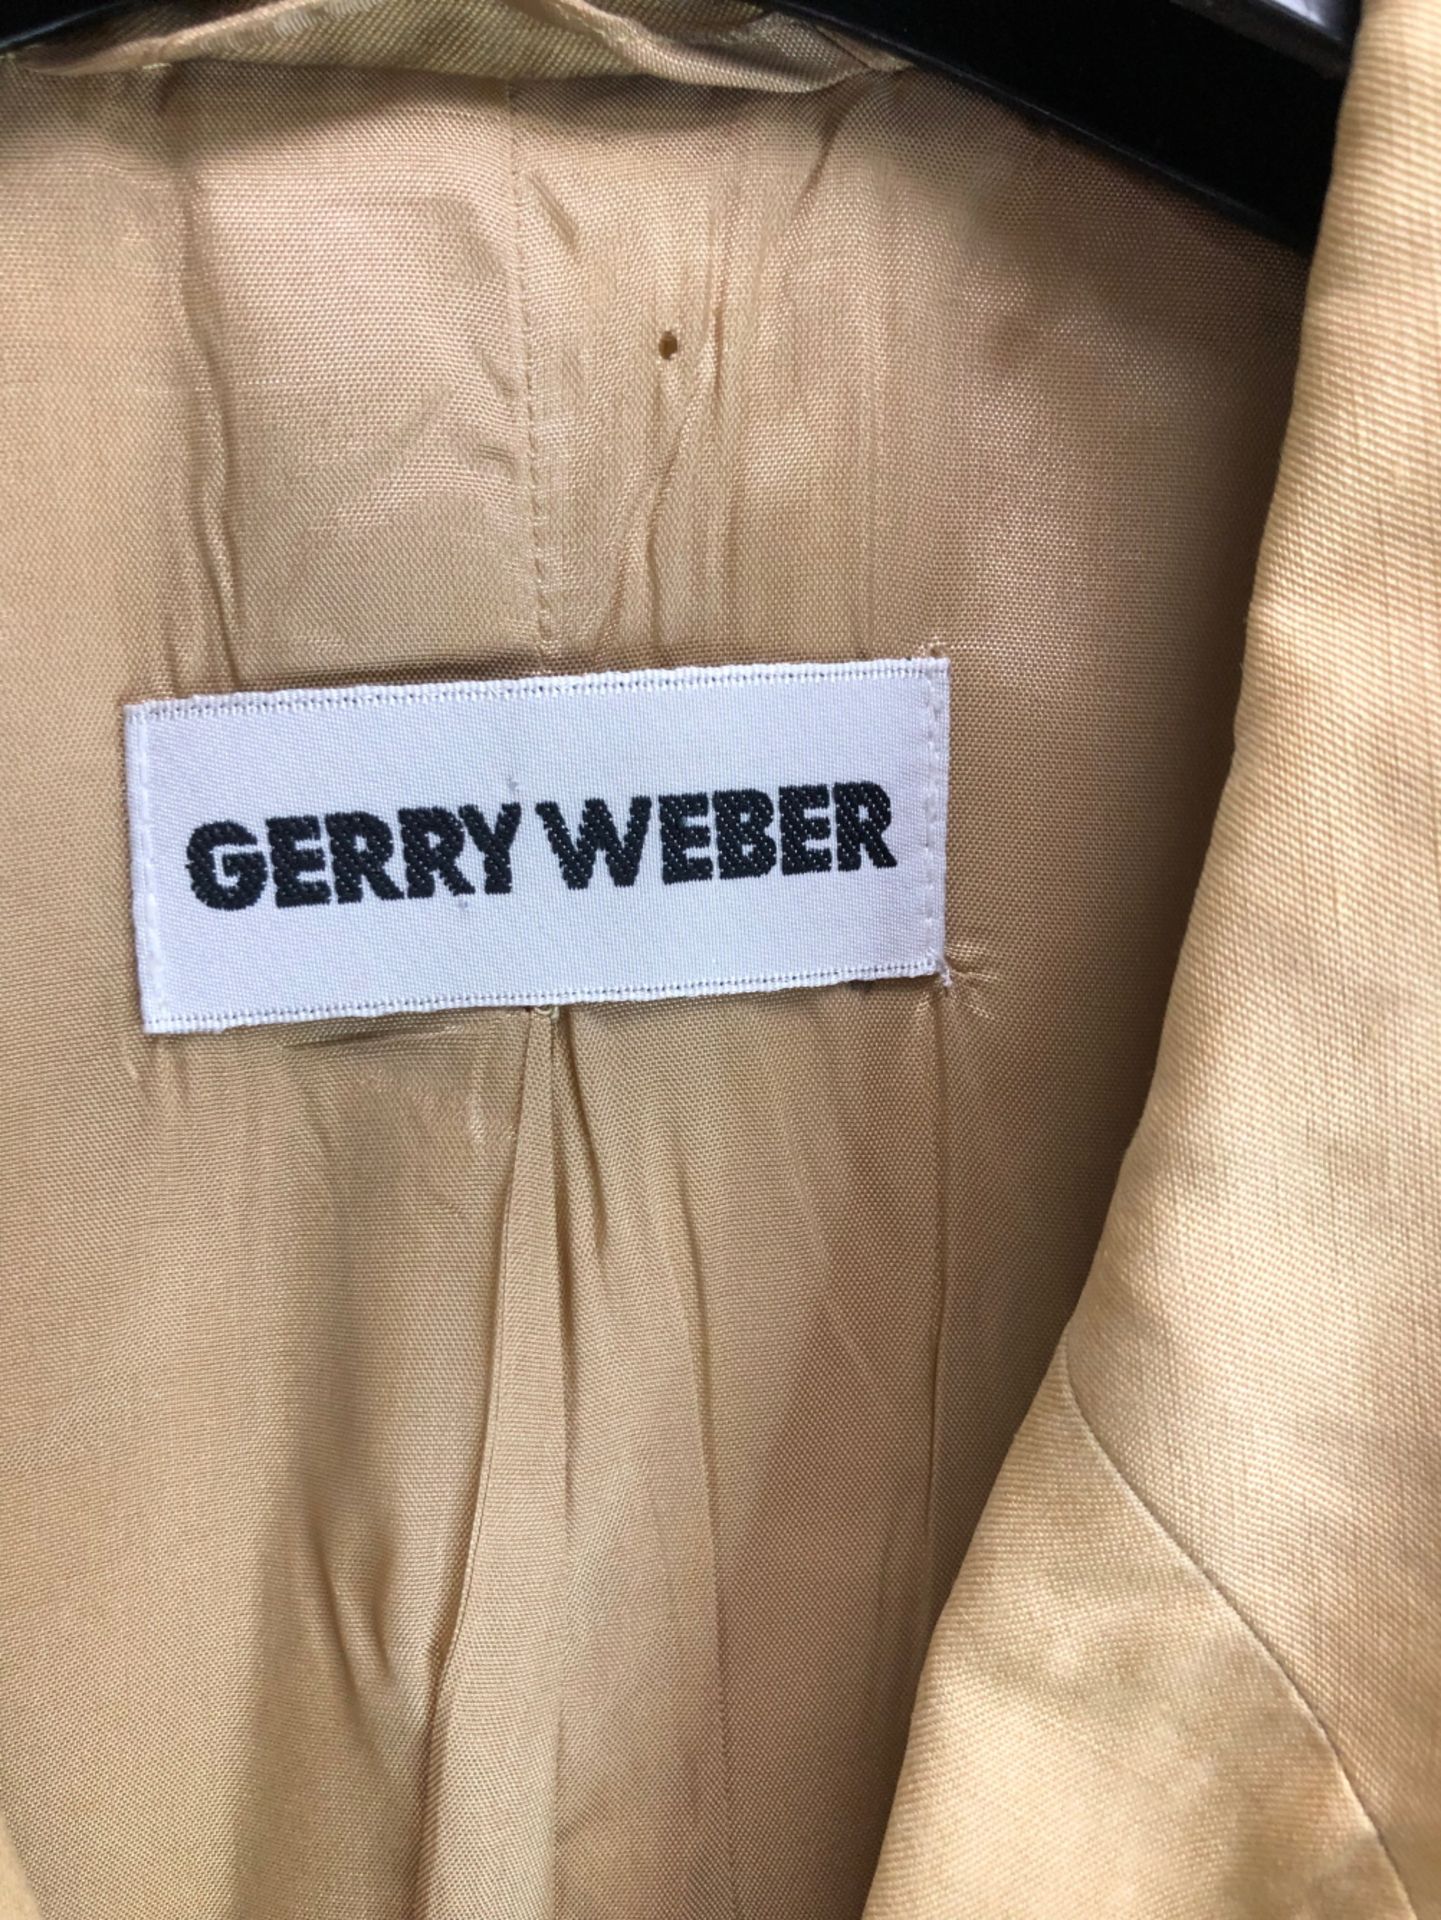 A GERRY WEBER PALE YELLOW SILK AND LINEN BLEND JACKET, SIZE ON TAG 36, TWO JOBIS CHECK PATTERN - Bild 3 aus 11